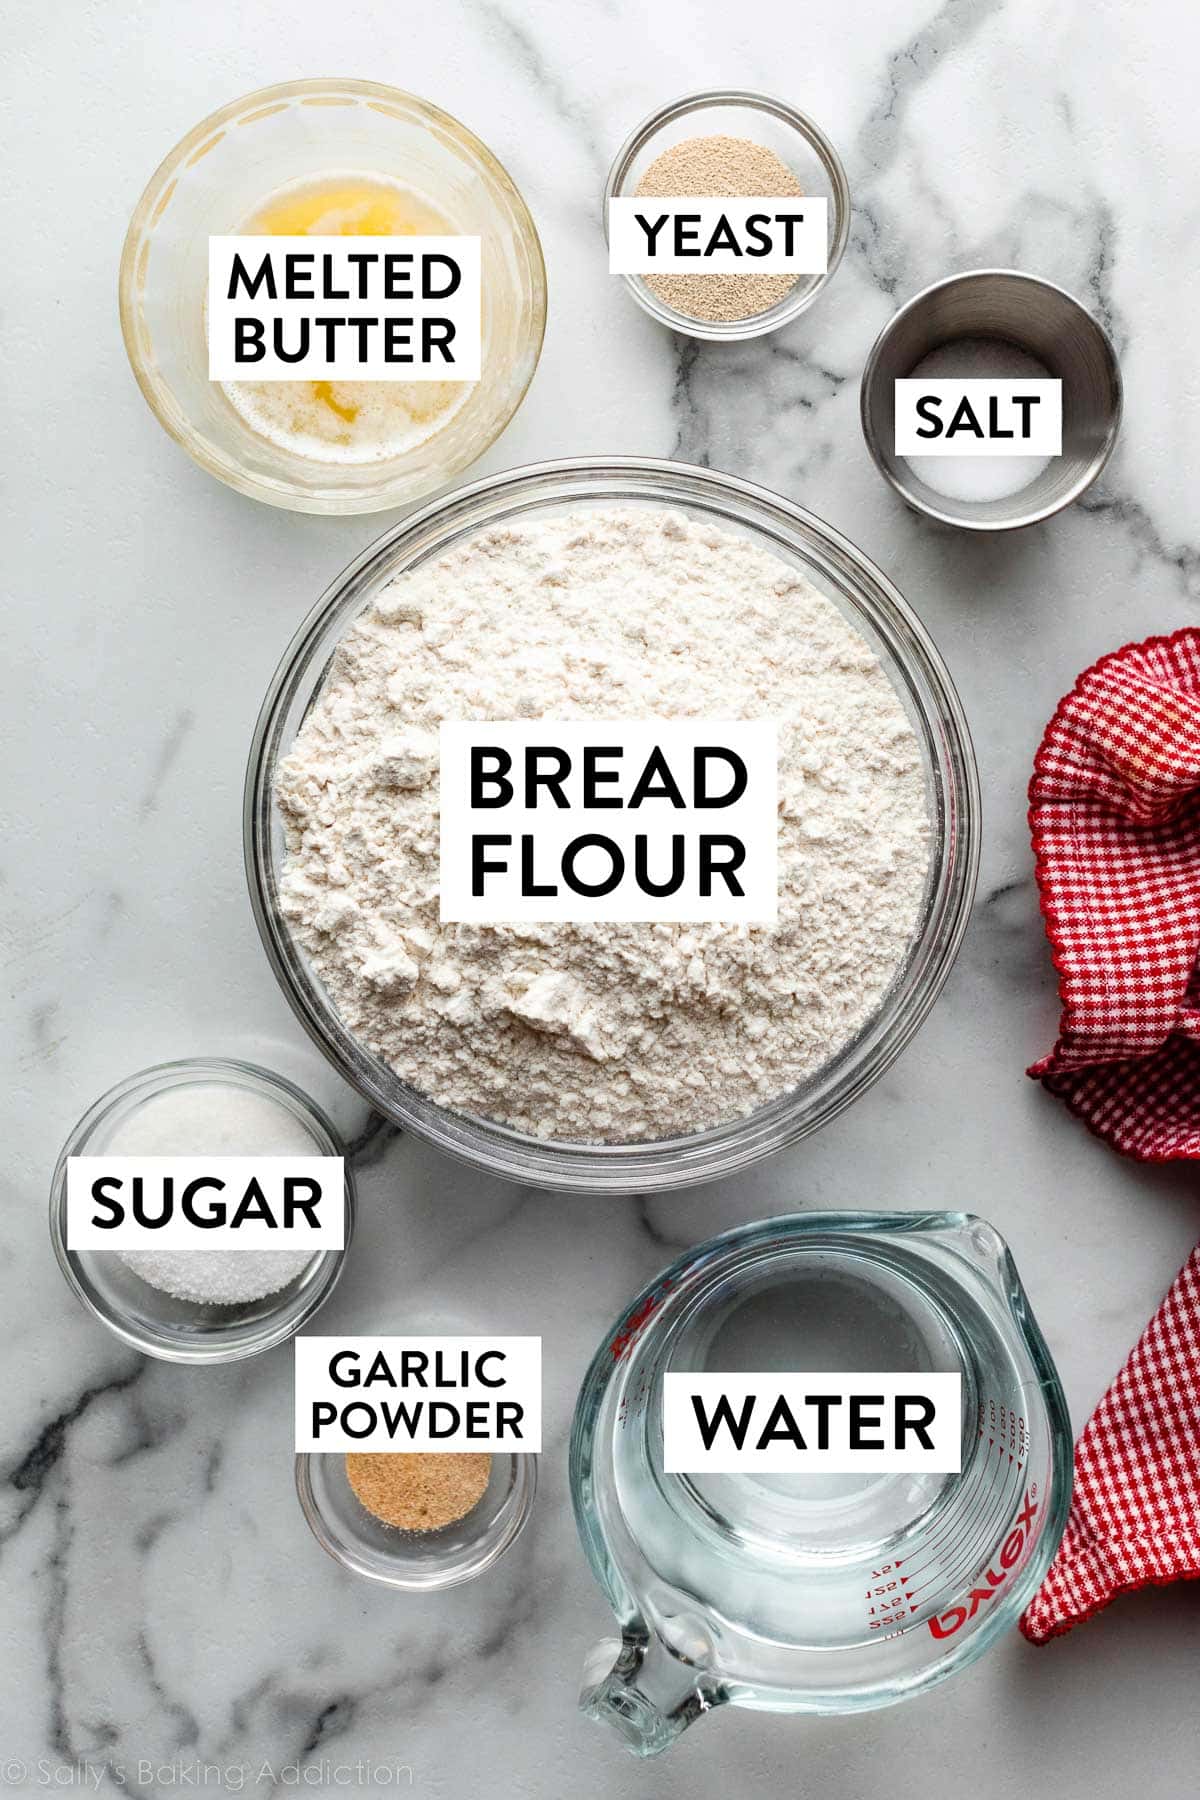 ingredients on marble counter including bread flour, melted butter, yeast, water, garlic powder, salt, and sugar.